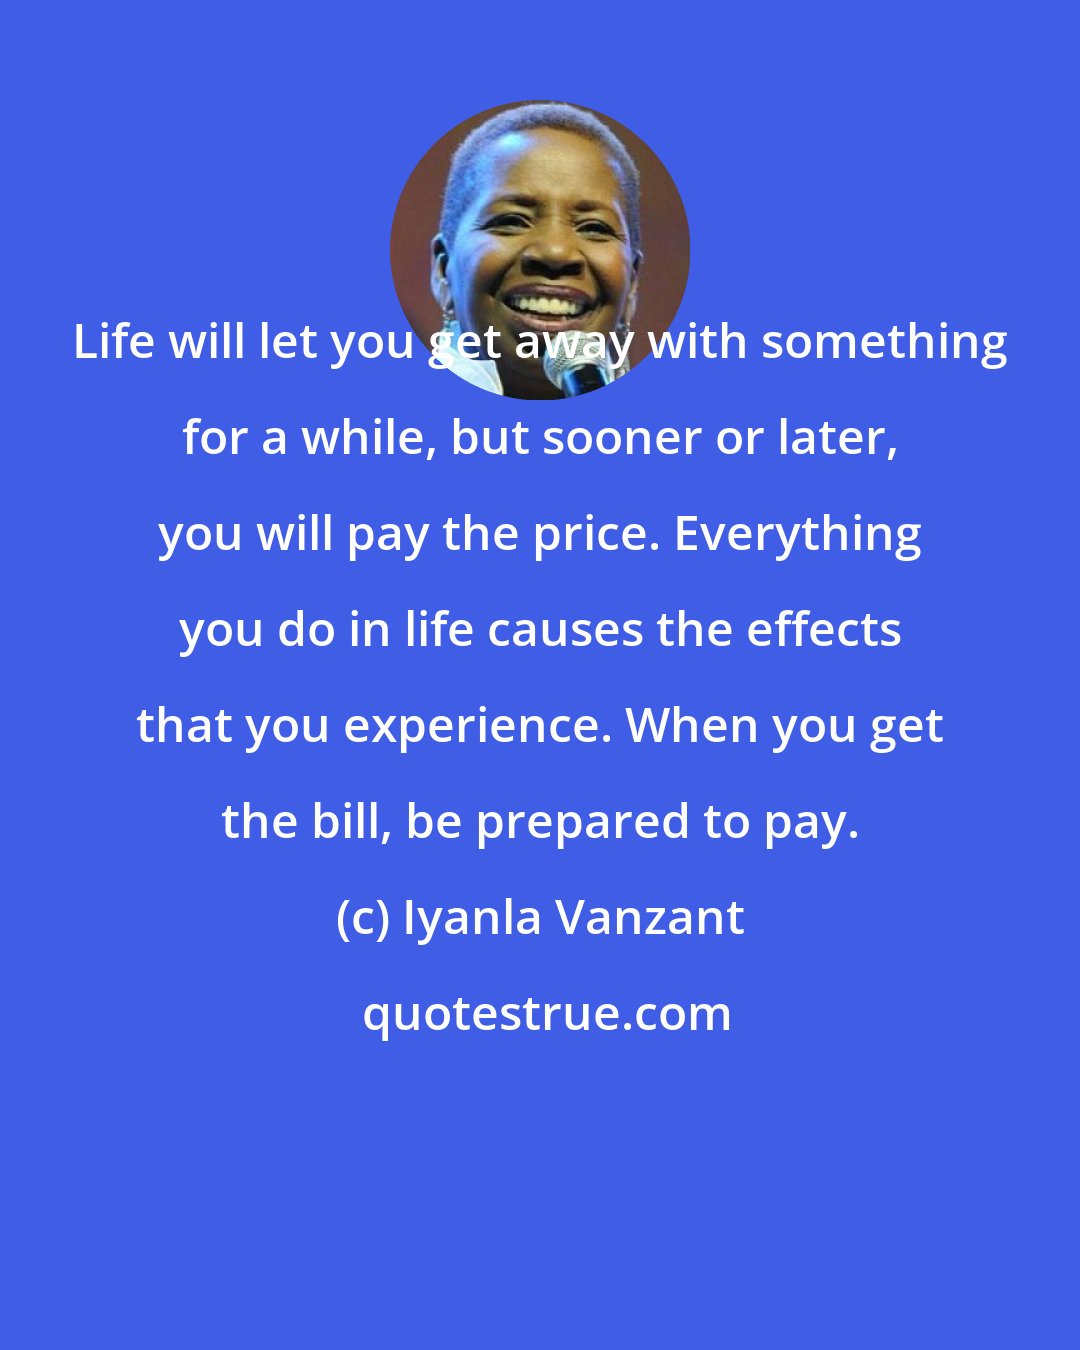 Iyanla Vanzant: Life will let you get away with something for a while, but sooner or later, you will pay the price. Everything you do in life causes the effects that you experience. When you get the bill, be prepared to pay.